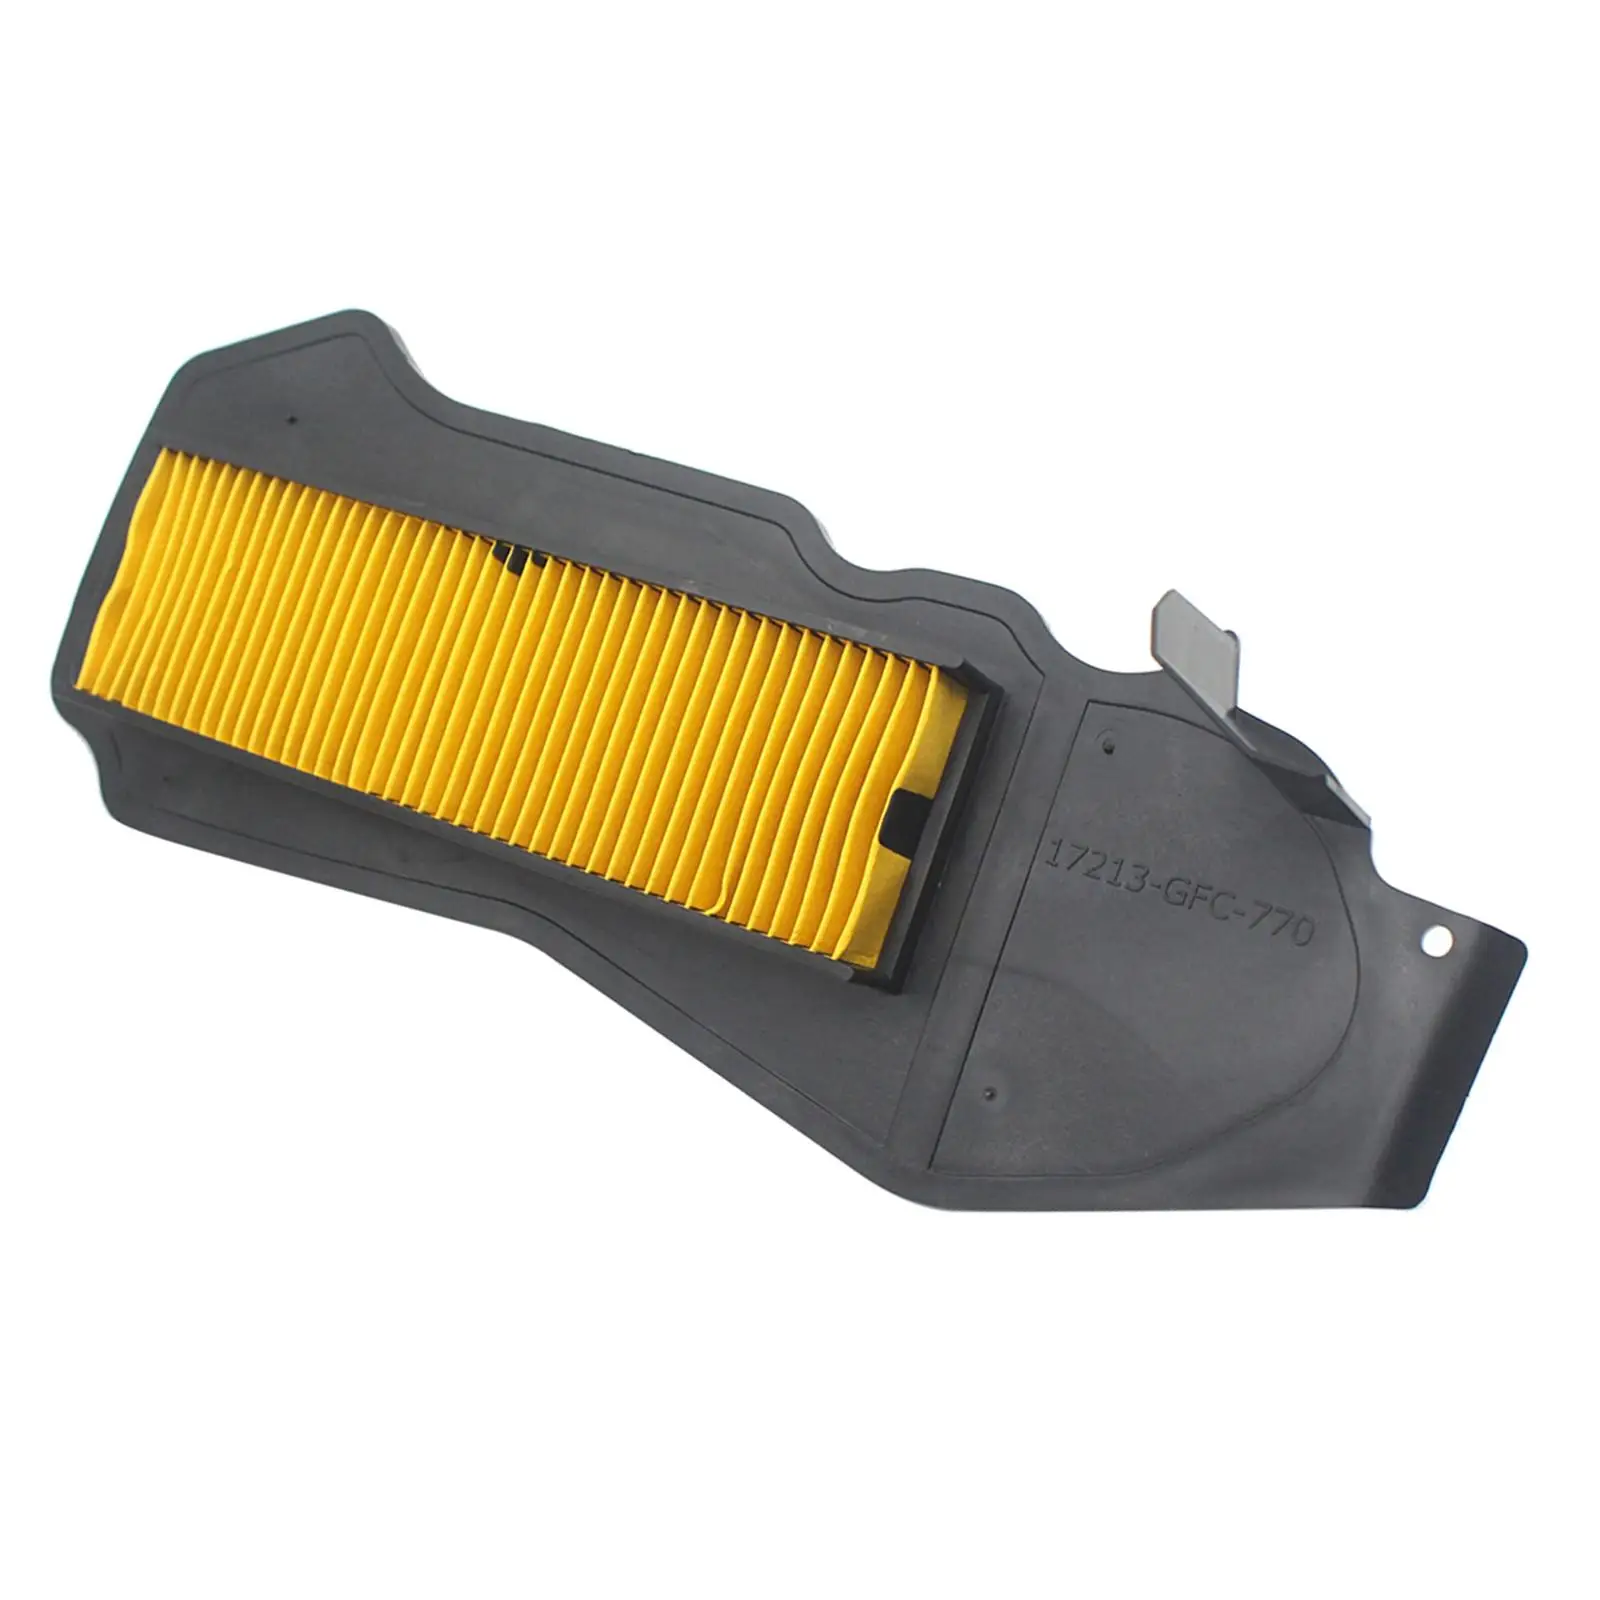 Motorcycle Air Filter System Air Filter Inlet Cleaner for HONDA Dio AF68